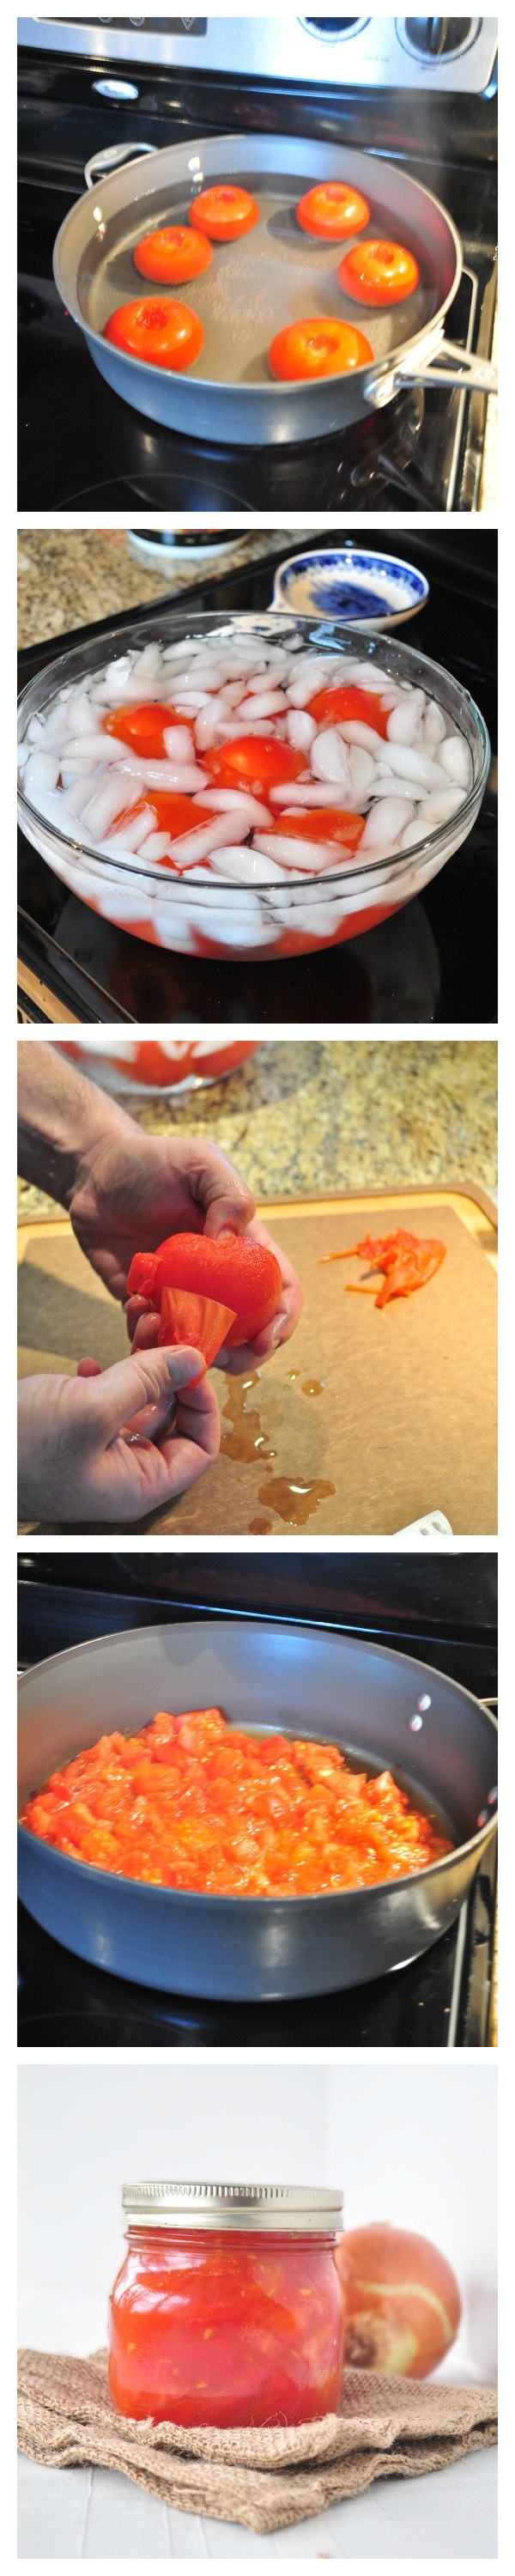 How to make Diced Tomatoes